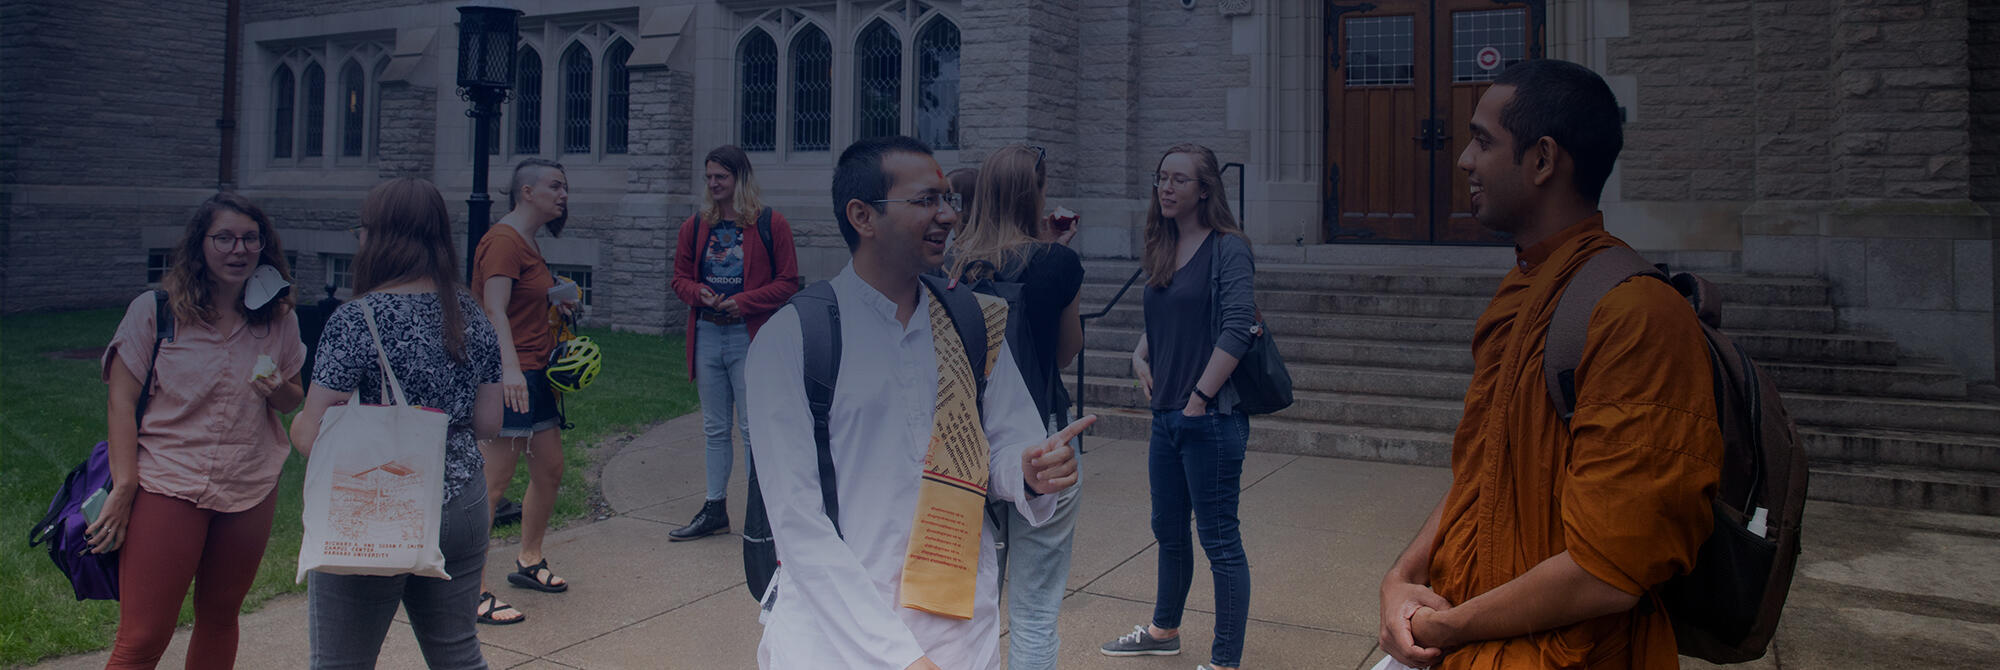 HDS students talking outside Swartz Hall, including Hindu and Buddhist monks